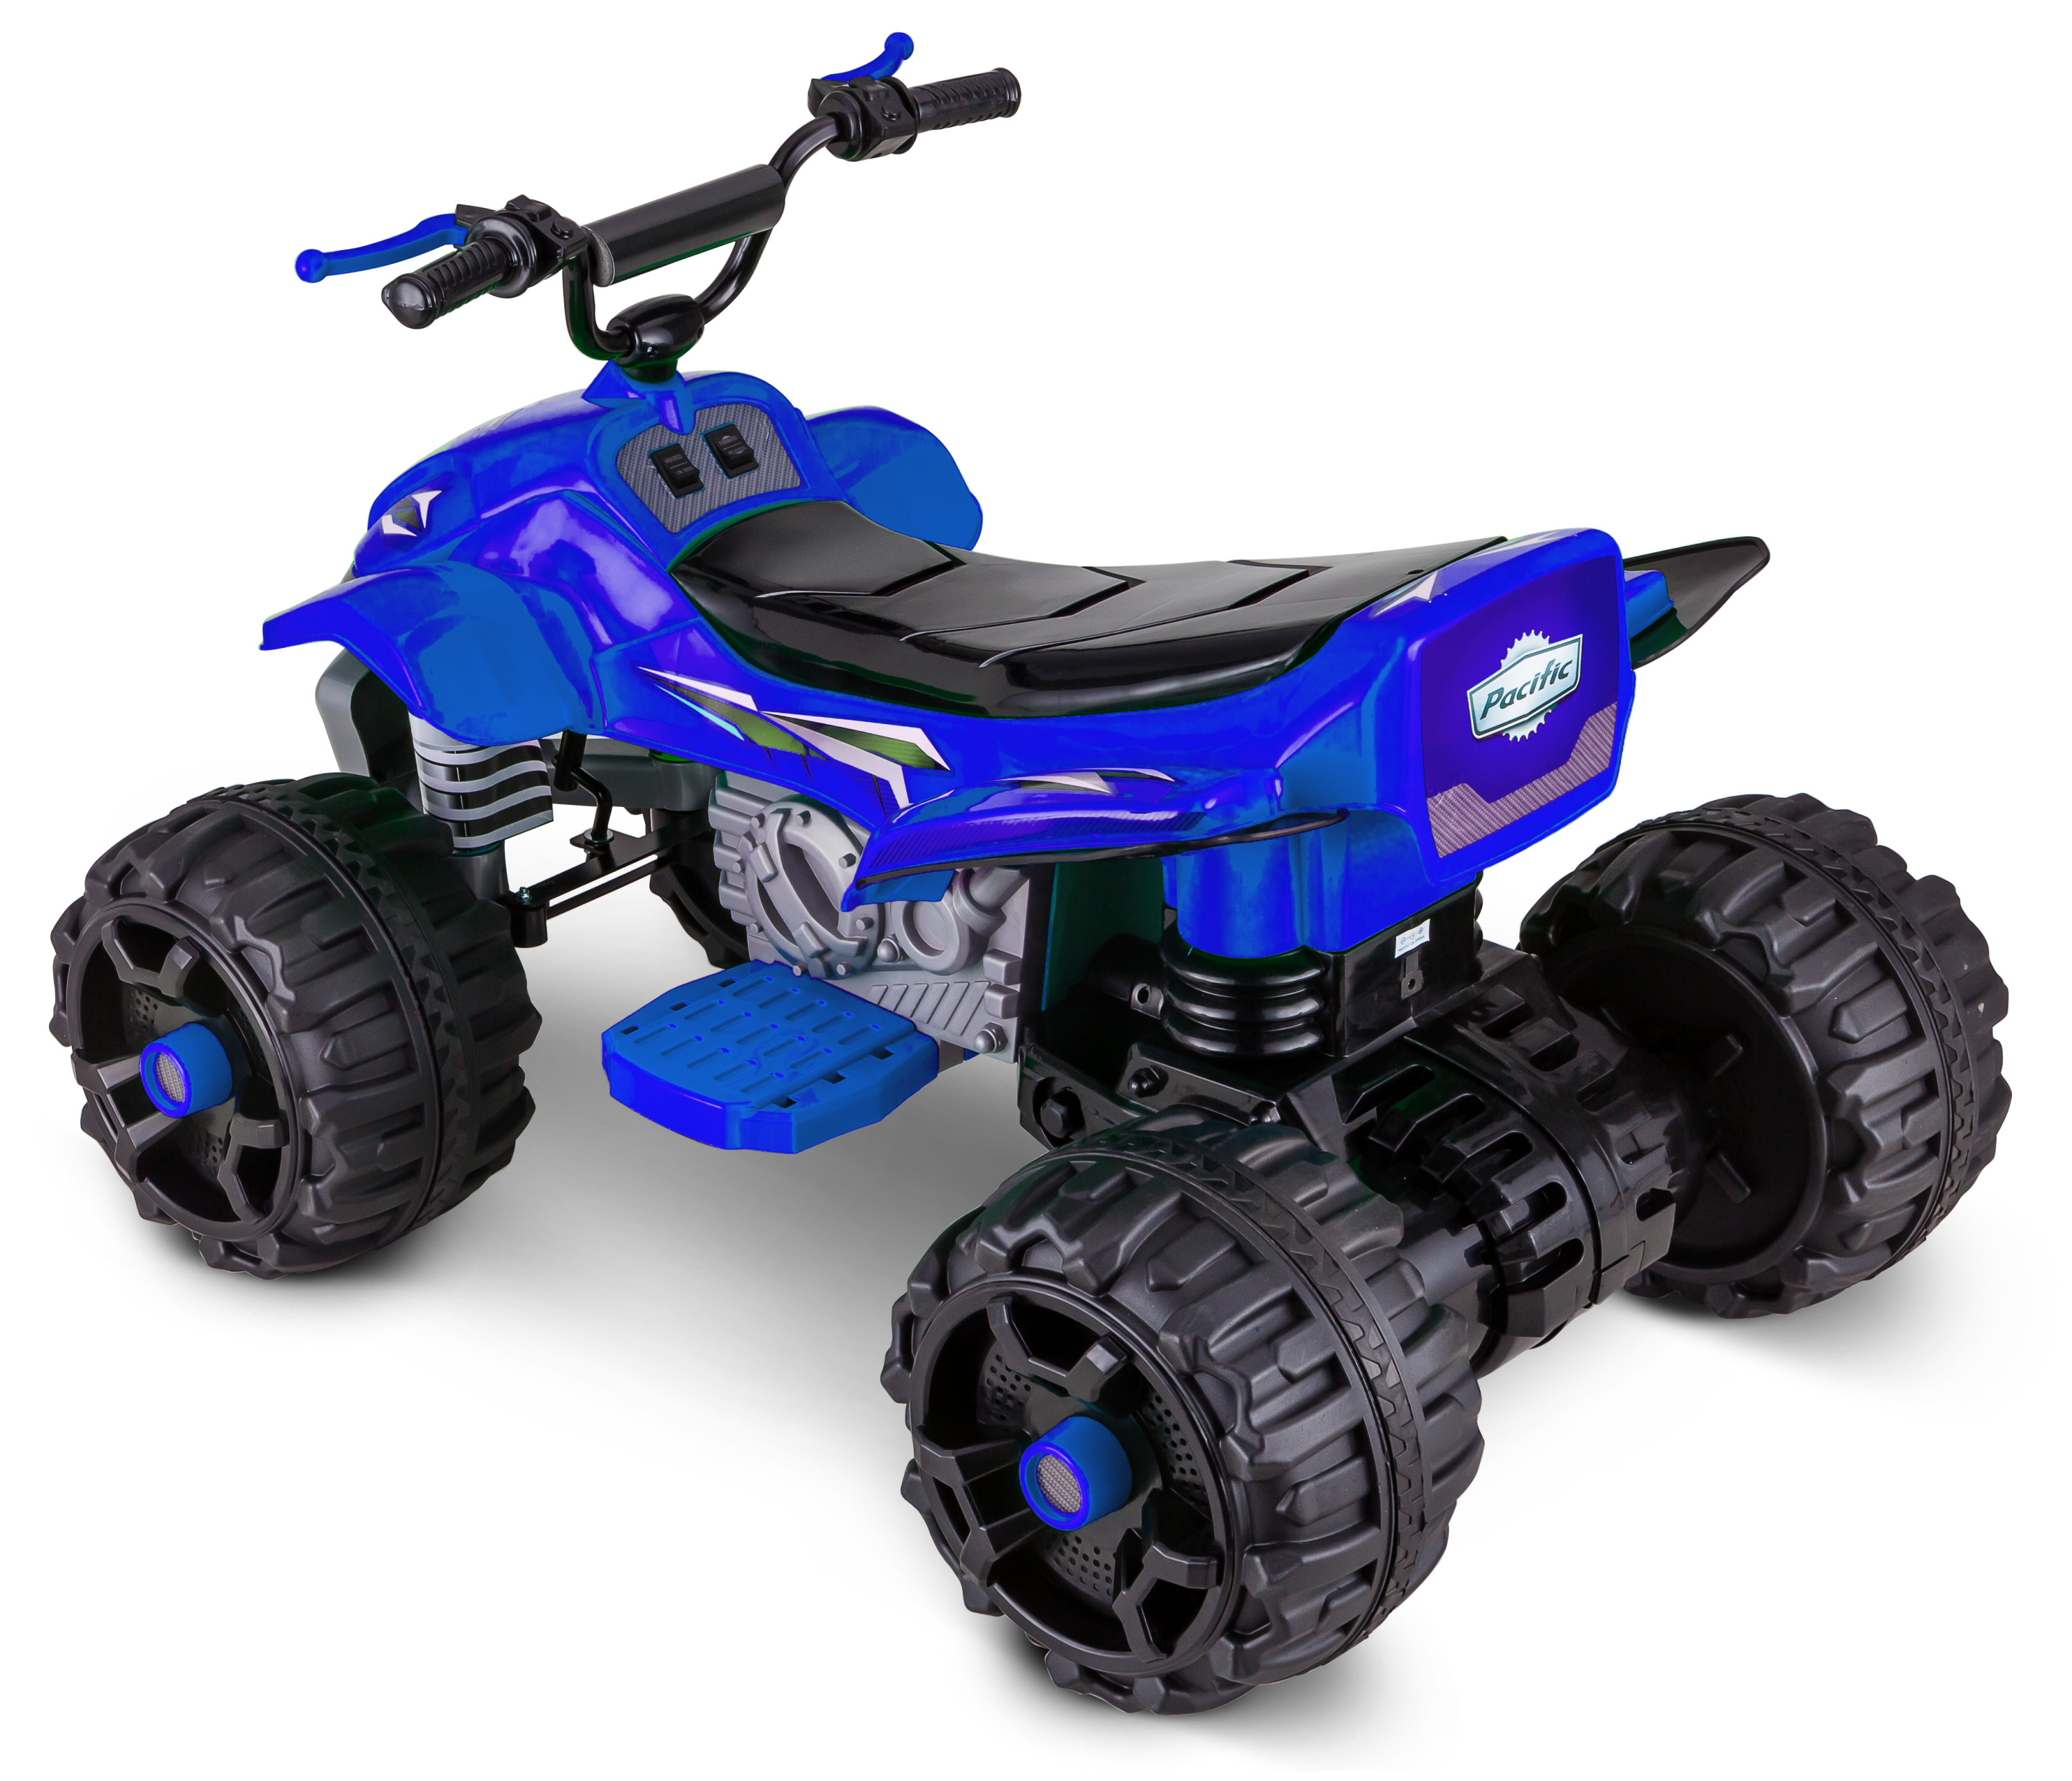 Sport ATV, 12-Volt Ride-On Toy by Kid Trax, ages 3+, blue - image 3 of 5